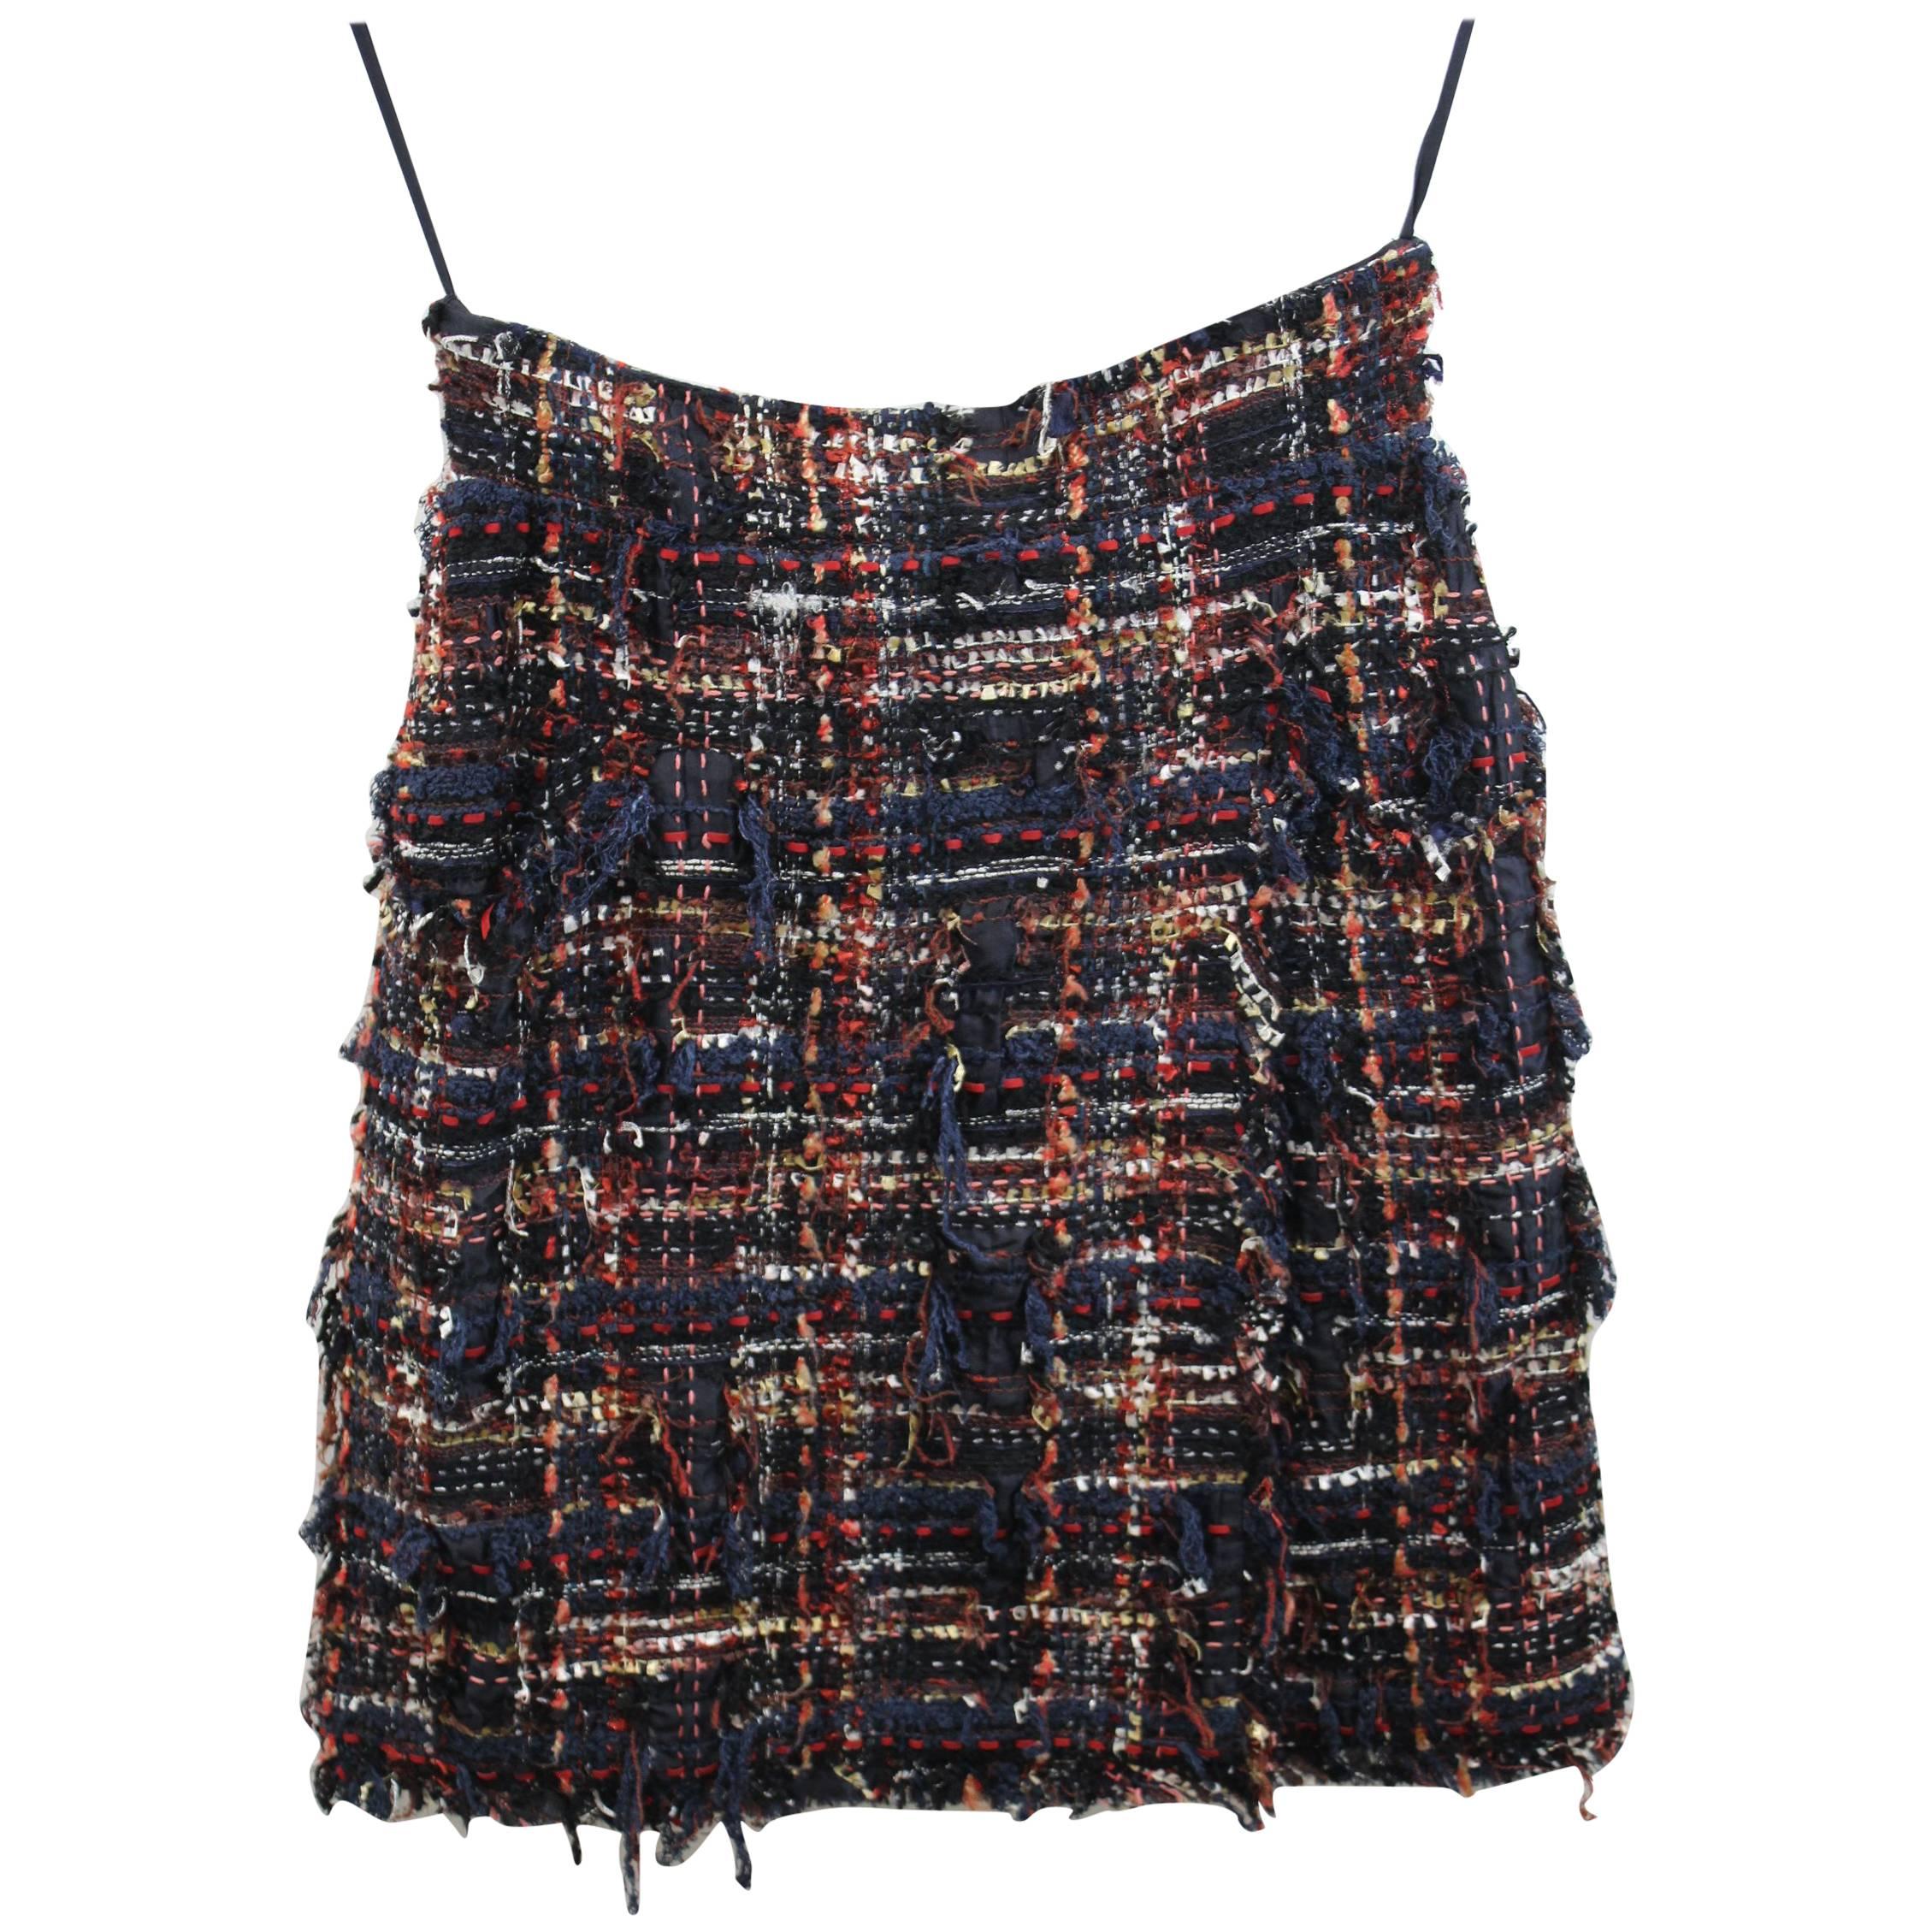 Chanel Multicolor Tweed skirt. Size French 38